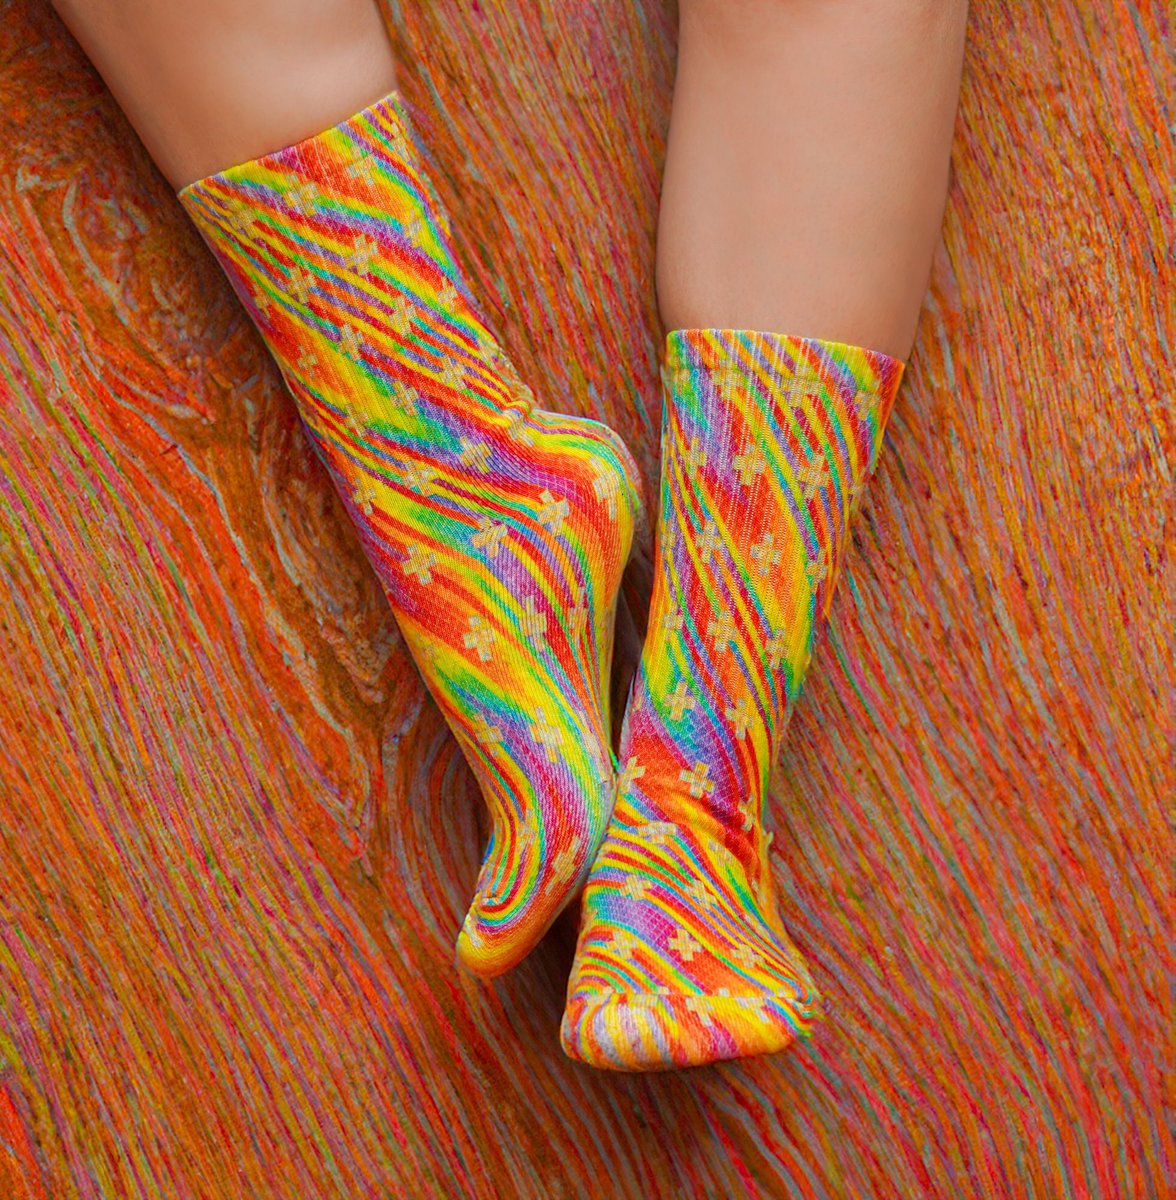 🌈 Revamp your sock drawer with the captivating Alex Grey & Allyson Grey collection. Your feet can be an artistic statement.

buff.ly/3Gt8J98

Featured styles: 
Mystic Eye  CoSM Logo
Angel Skin by @AlexGreyCoSM
Pearlescent Crossfield in Spectral Rain by @AllysonGreyCoSM